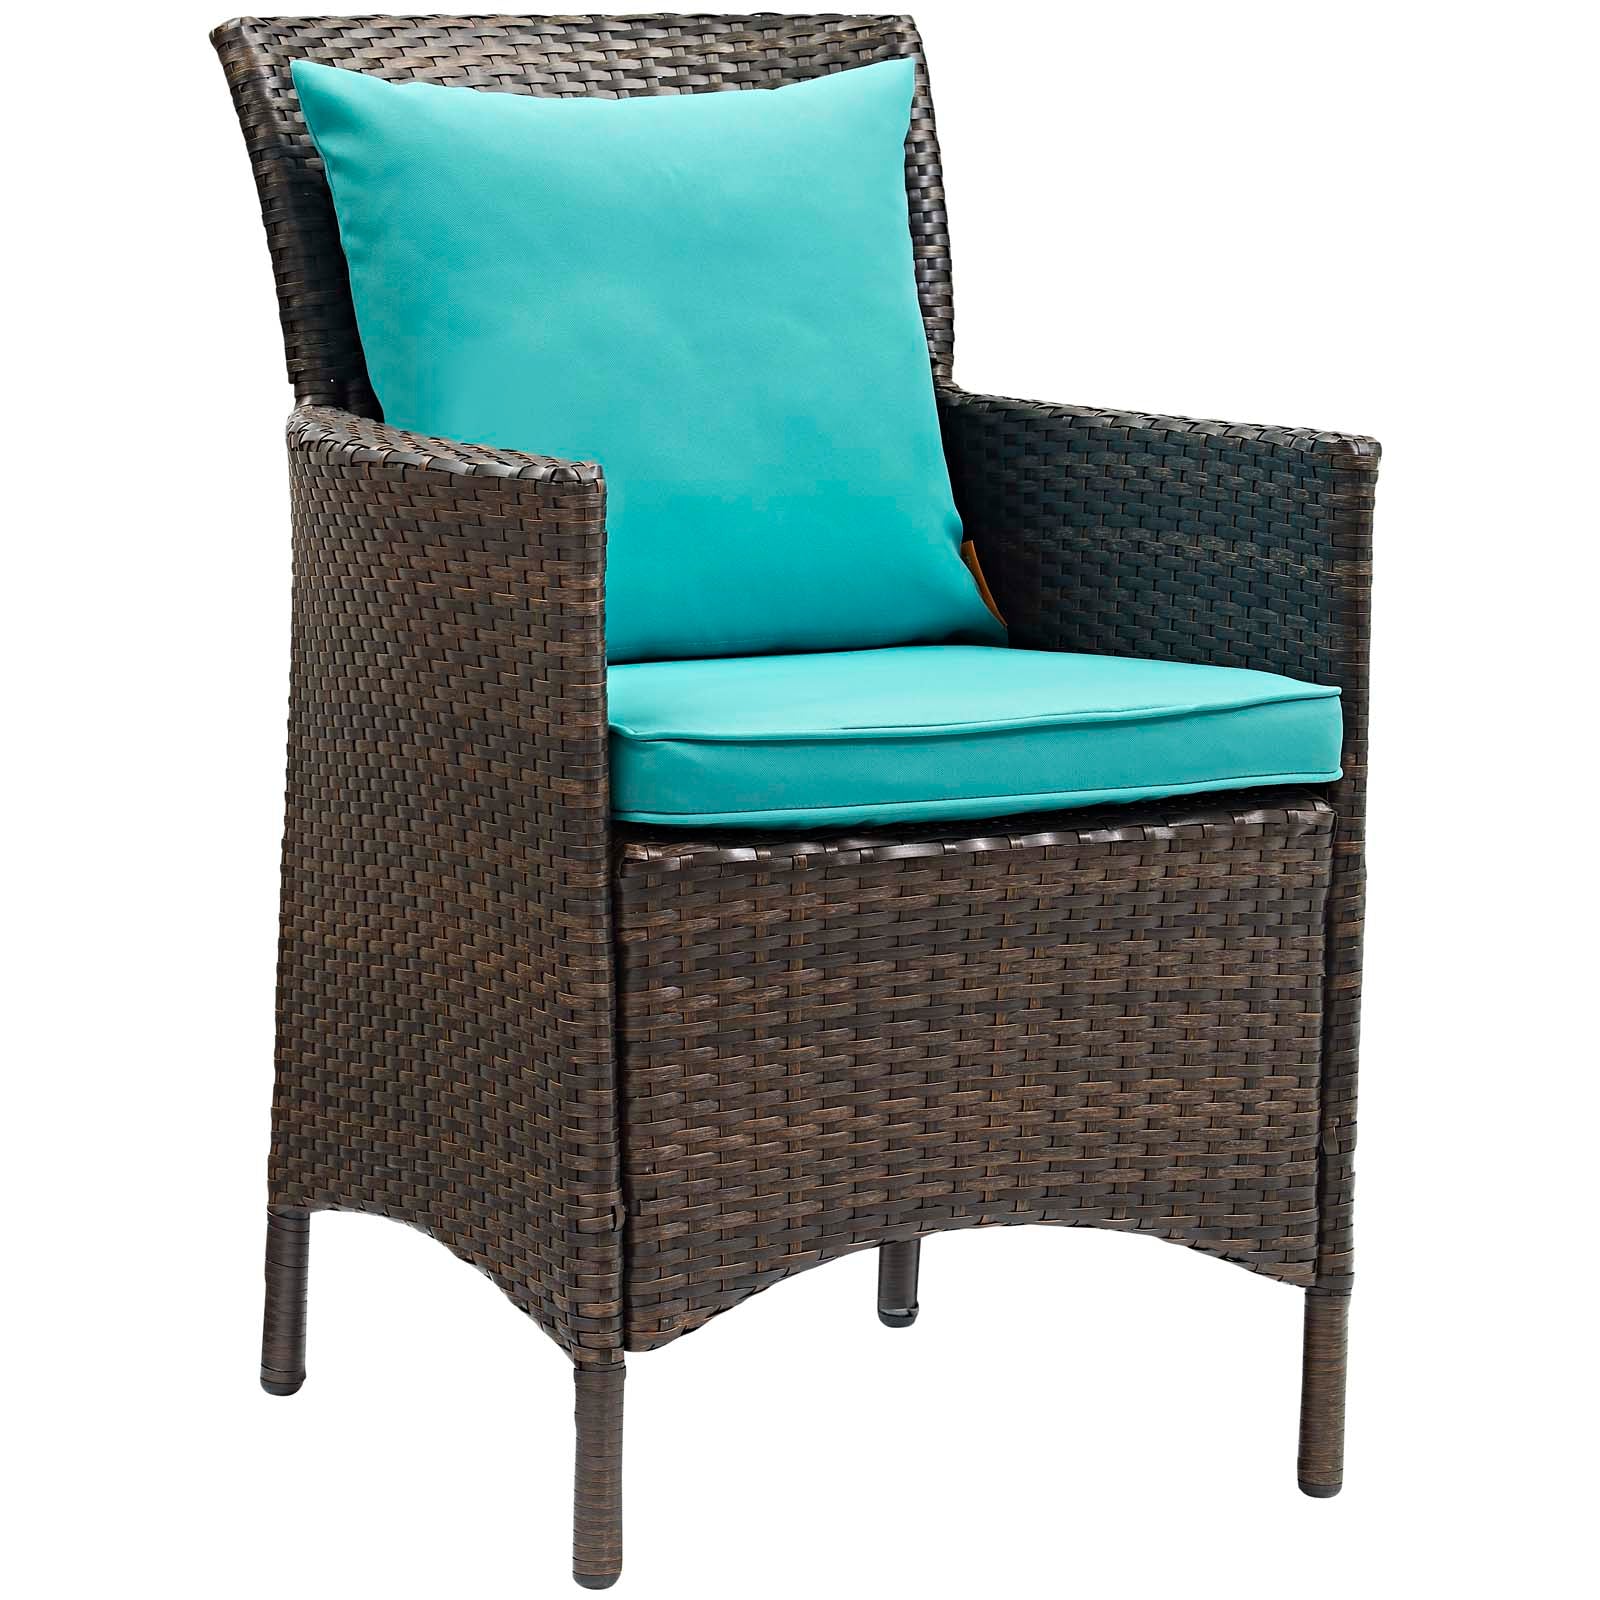 Conduit Outdoor Patio Wicker Rattan Dining Armchair Set of 4 - East Shore Modern Home Furnishings